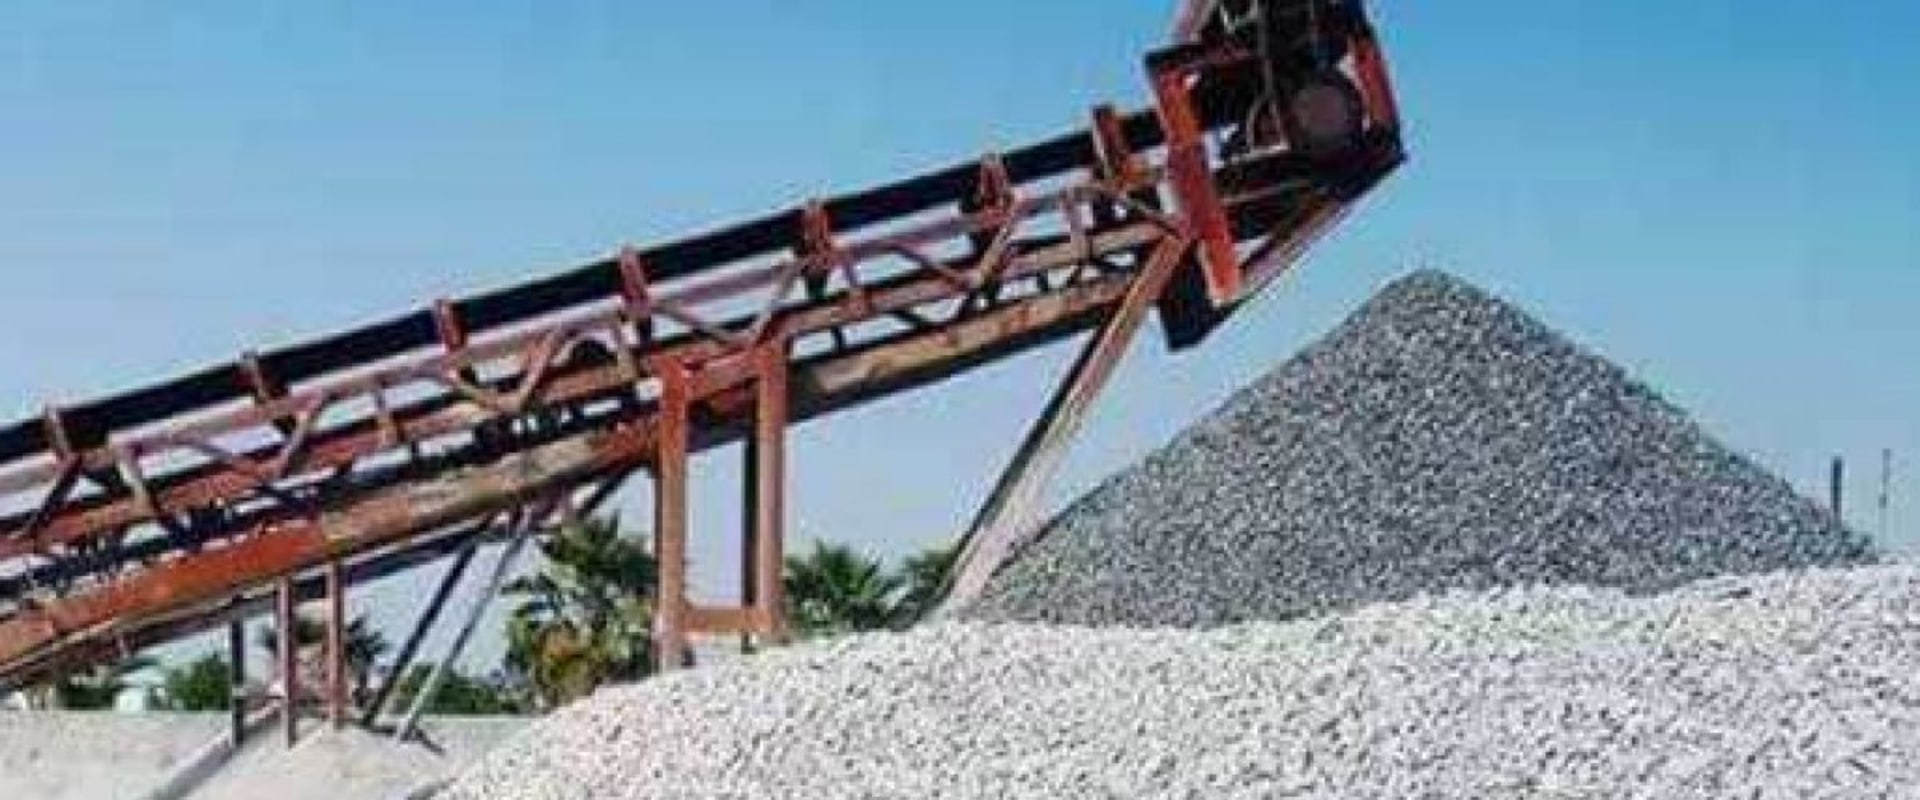 Classifying Aggregates: Shape, Size and Uses